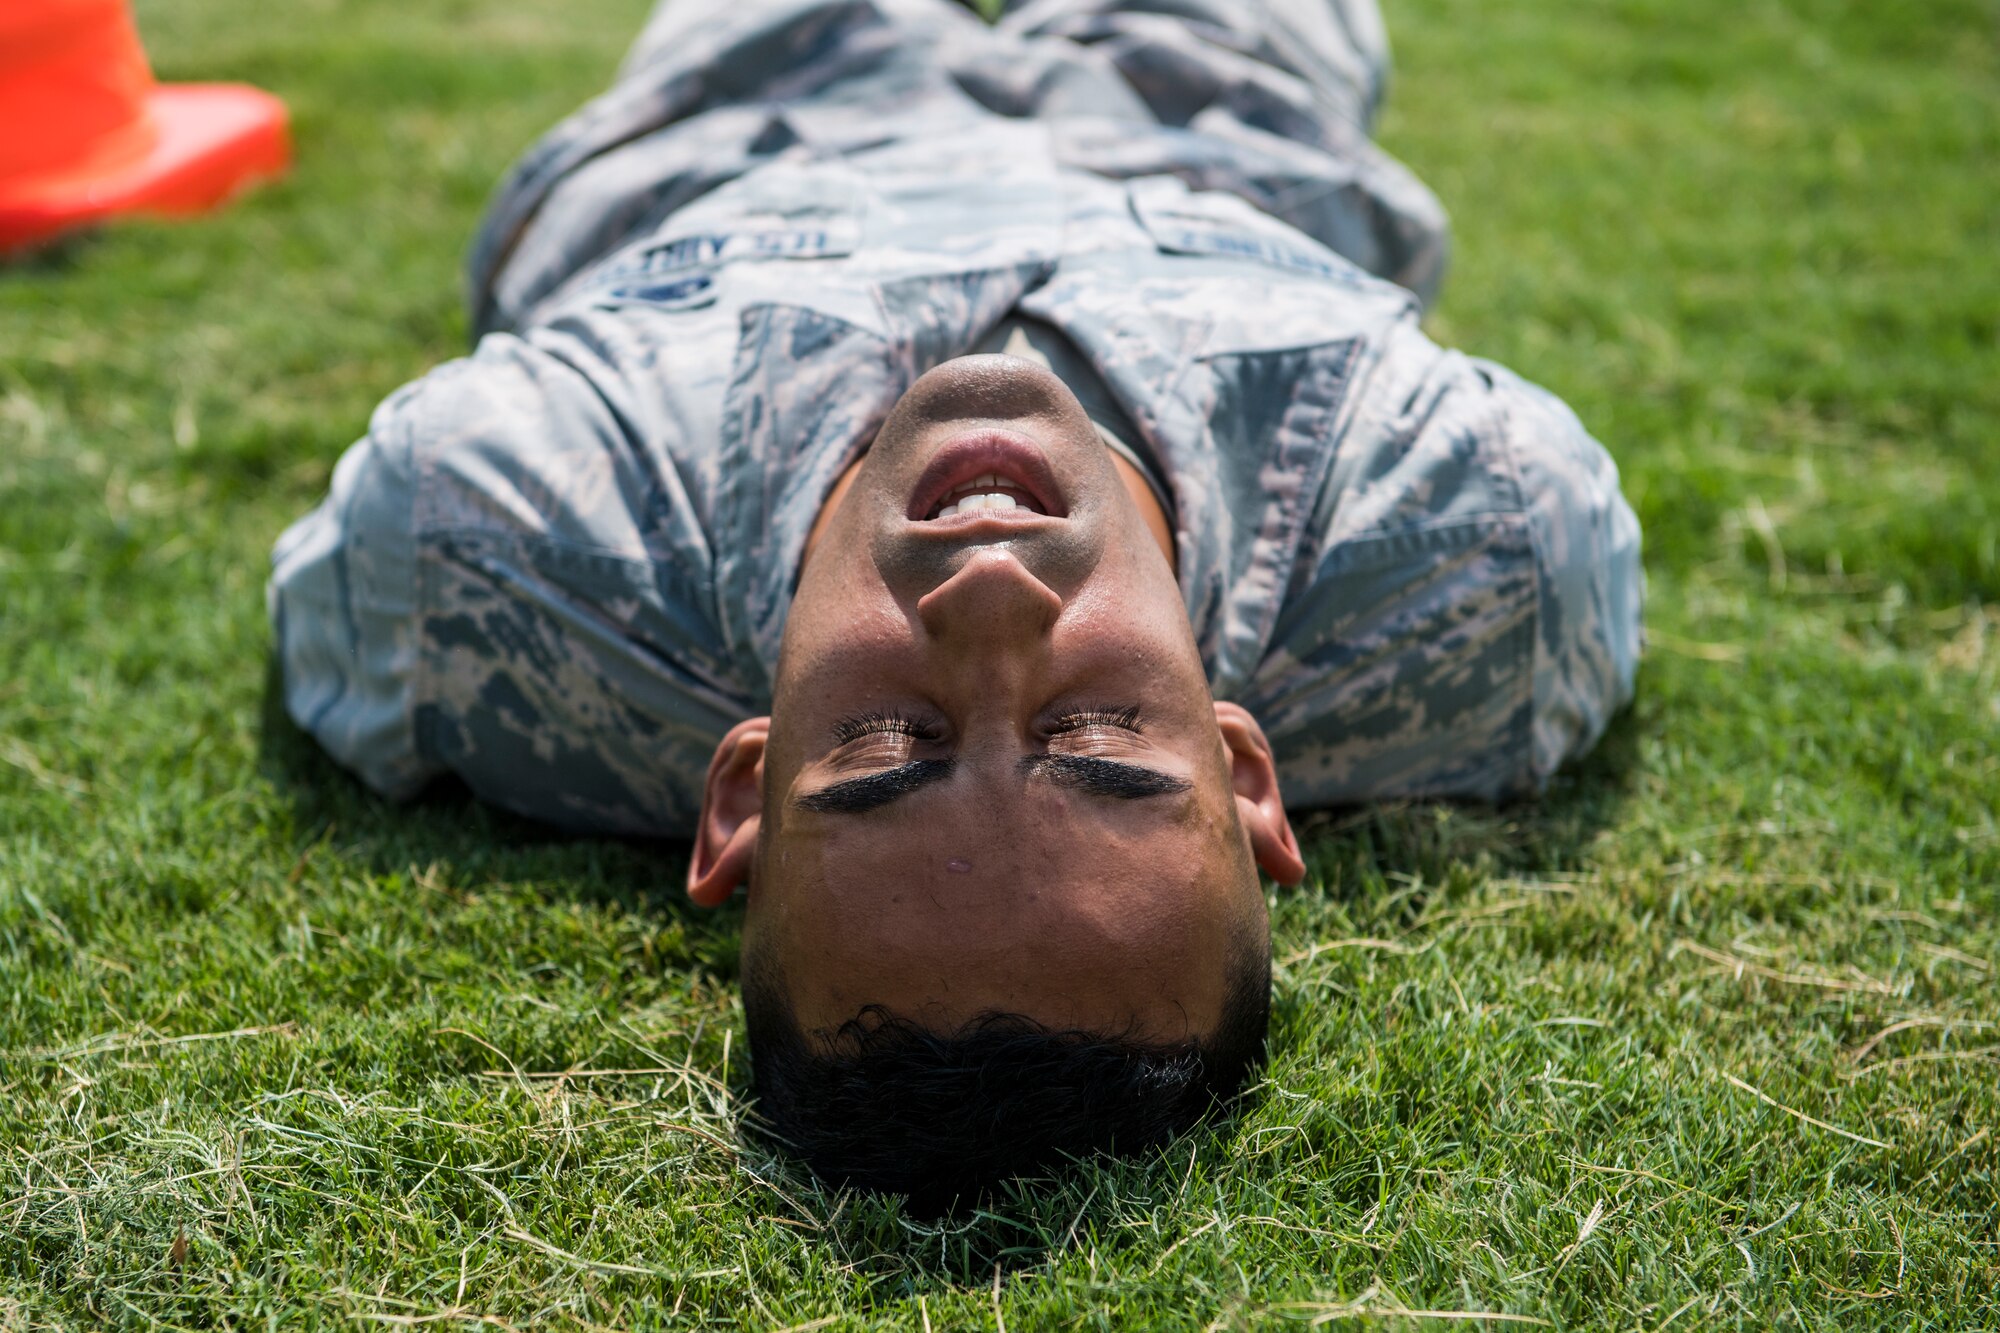 An Airman performs an obstacle during an obstacle course.